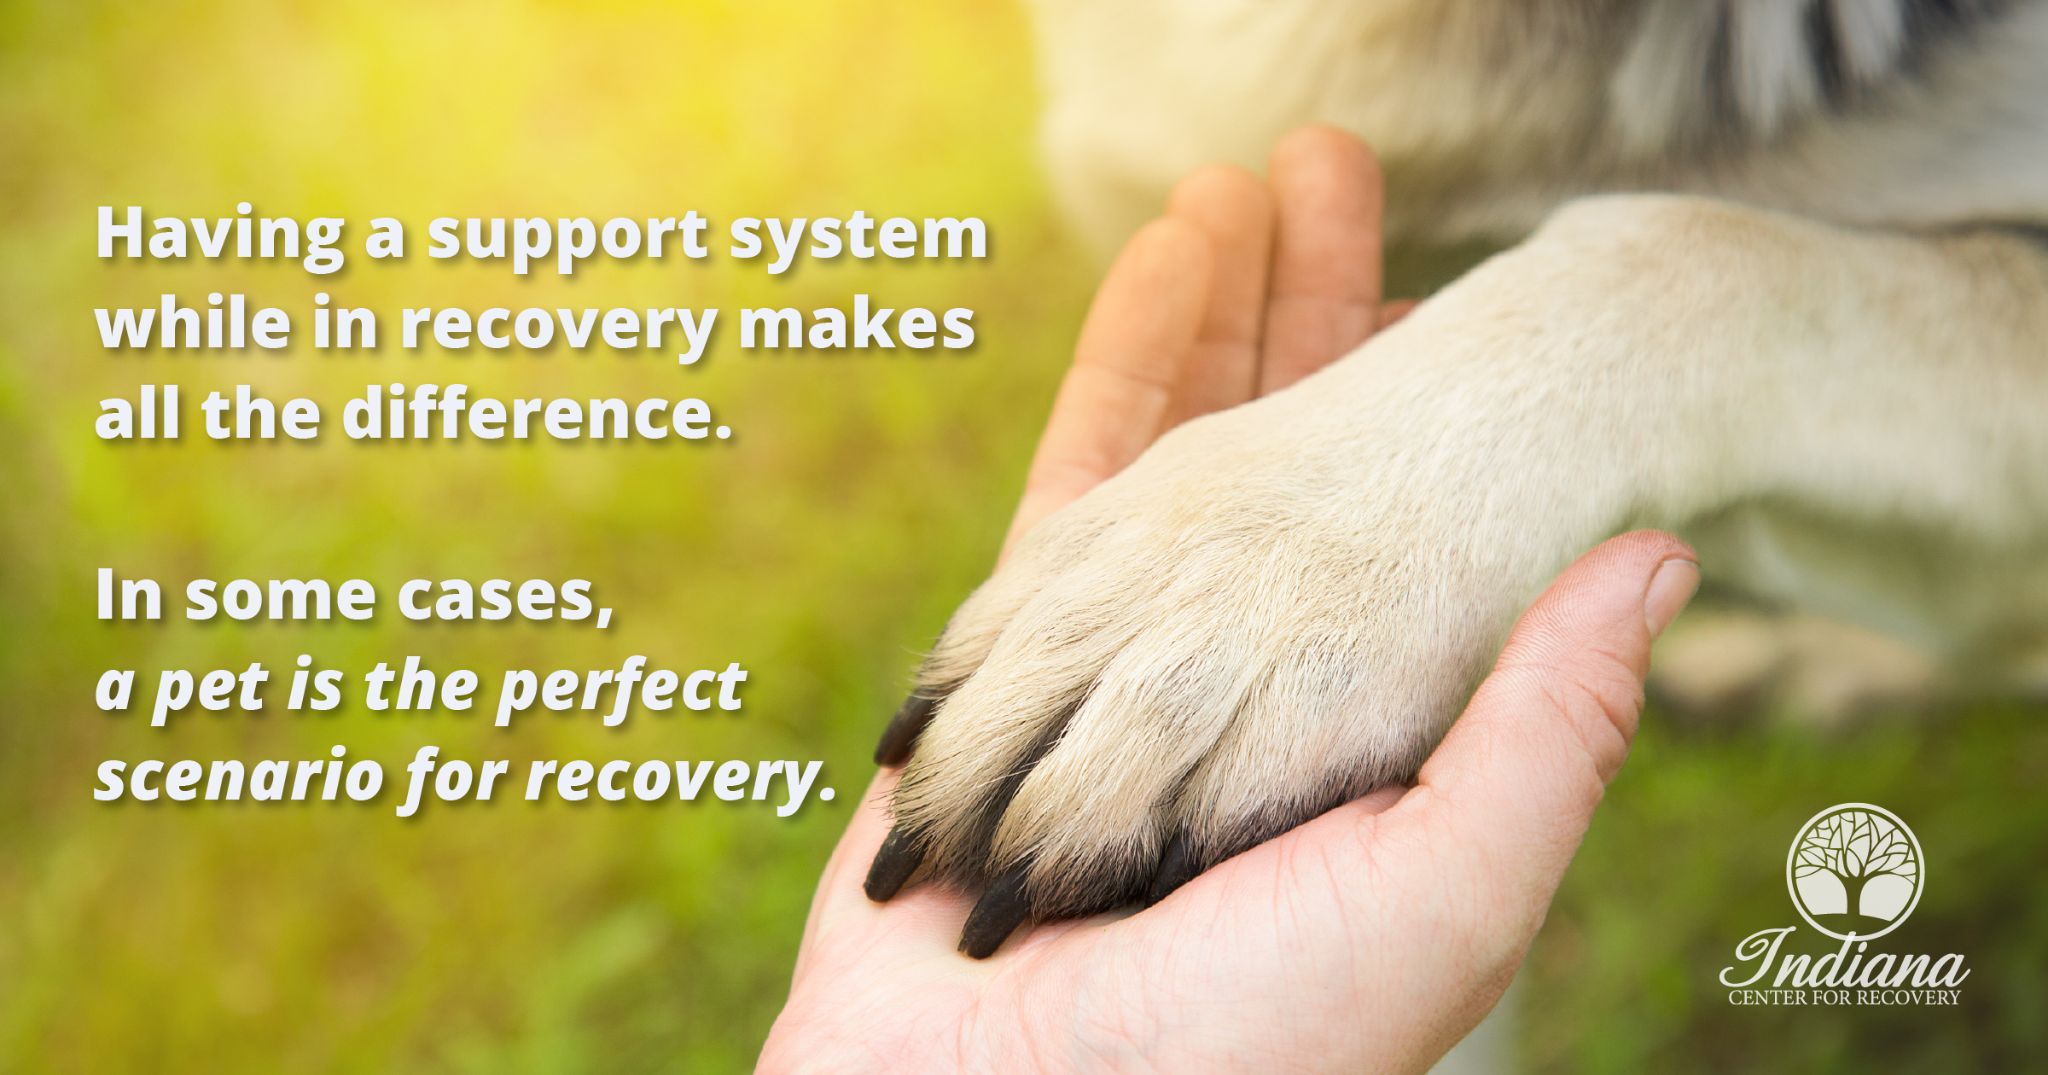 Having a support system while in recovery makes all the difference. In some cases, a pet is a perfect scenario for recovery.